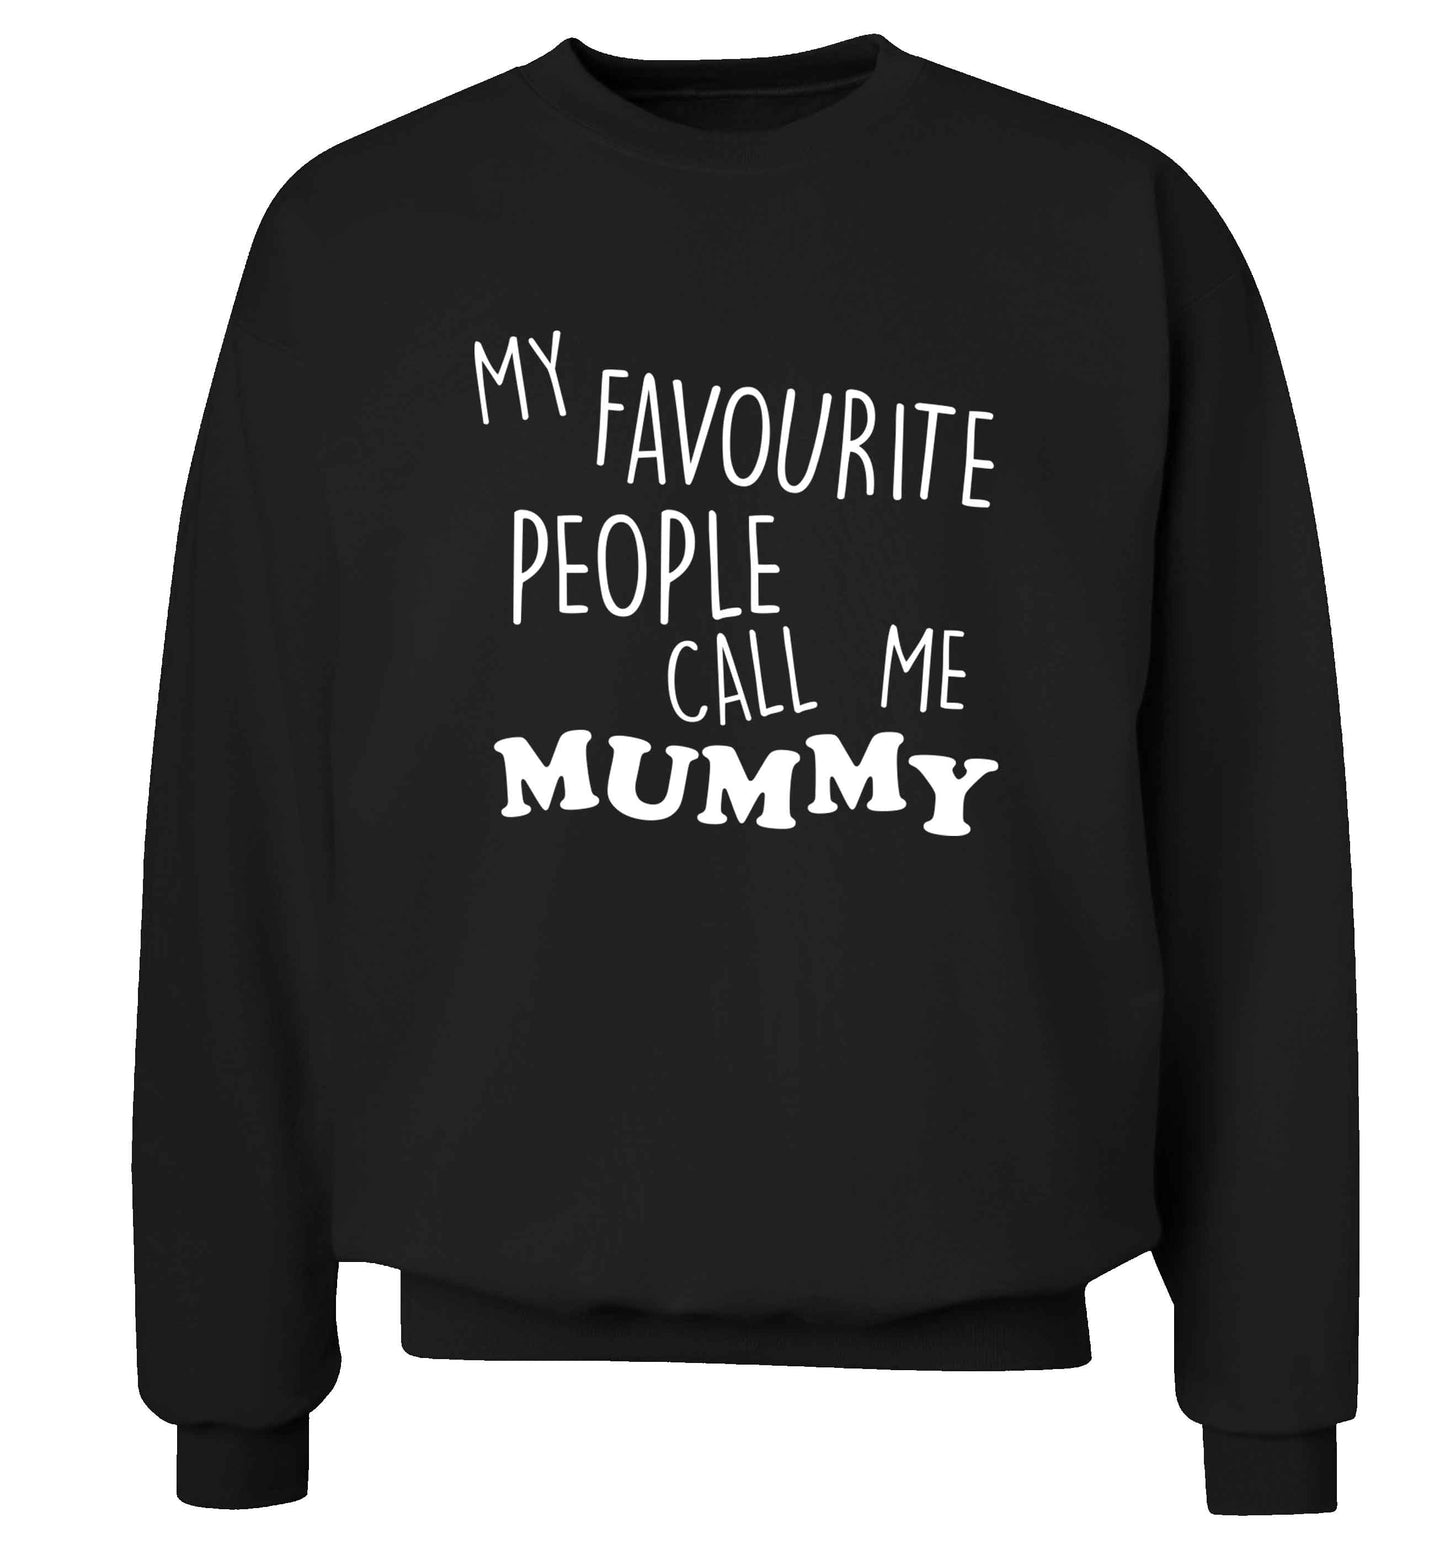 My favourite people call me mummy adult's unisex black sweater 2XL